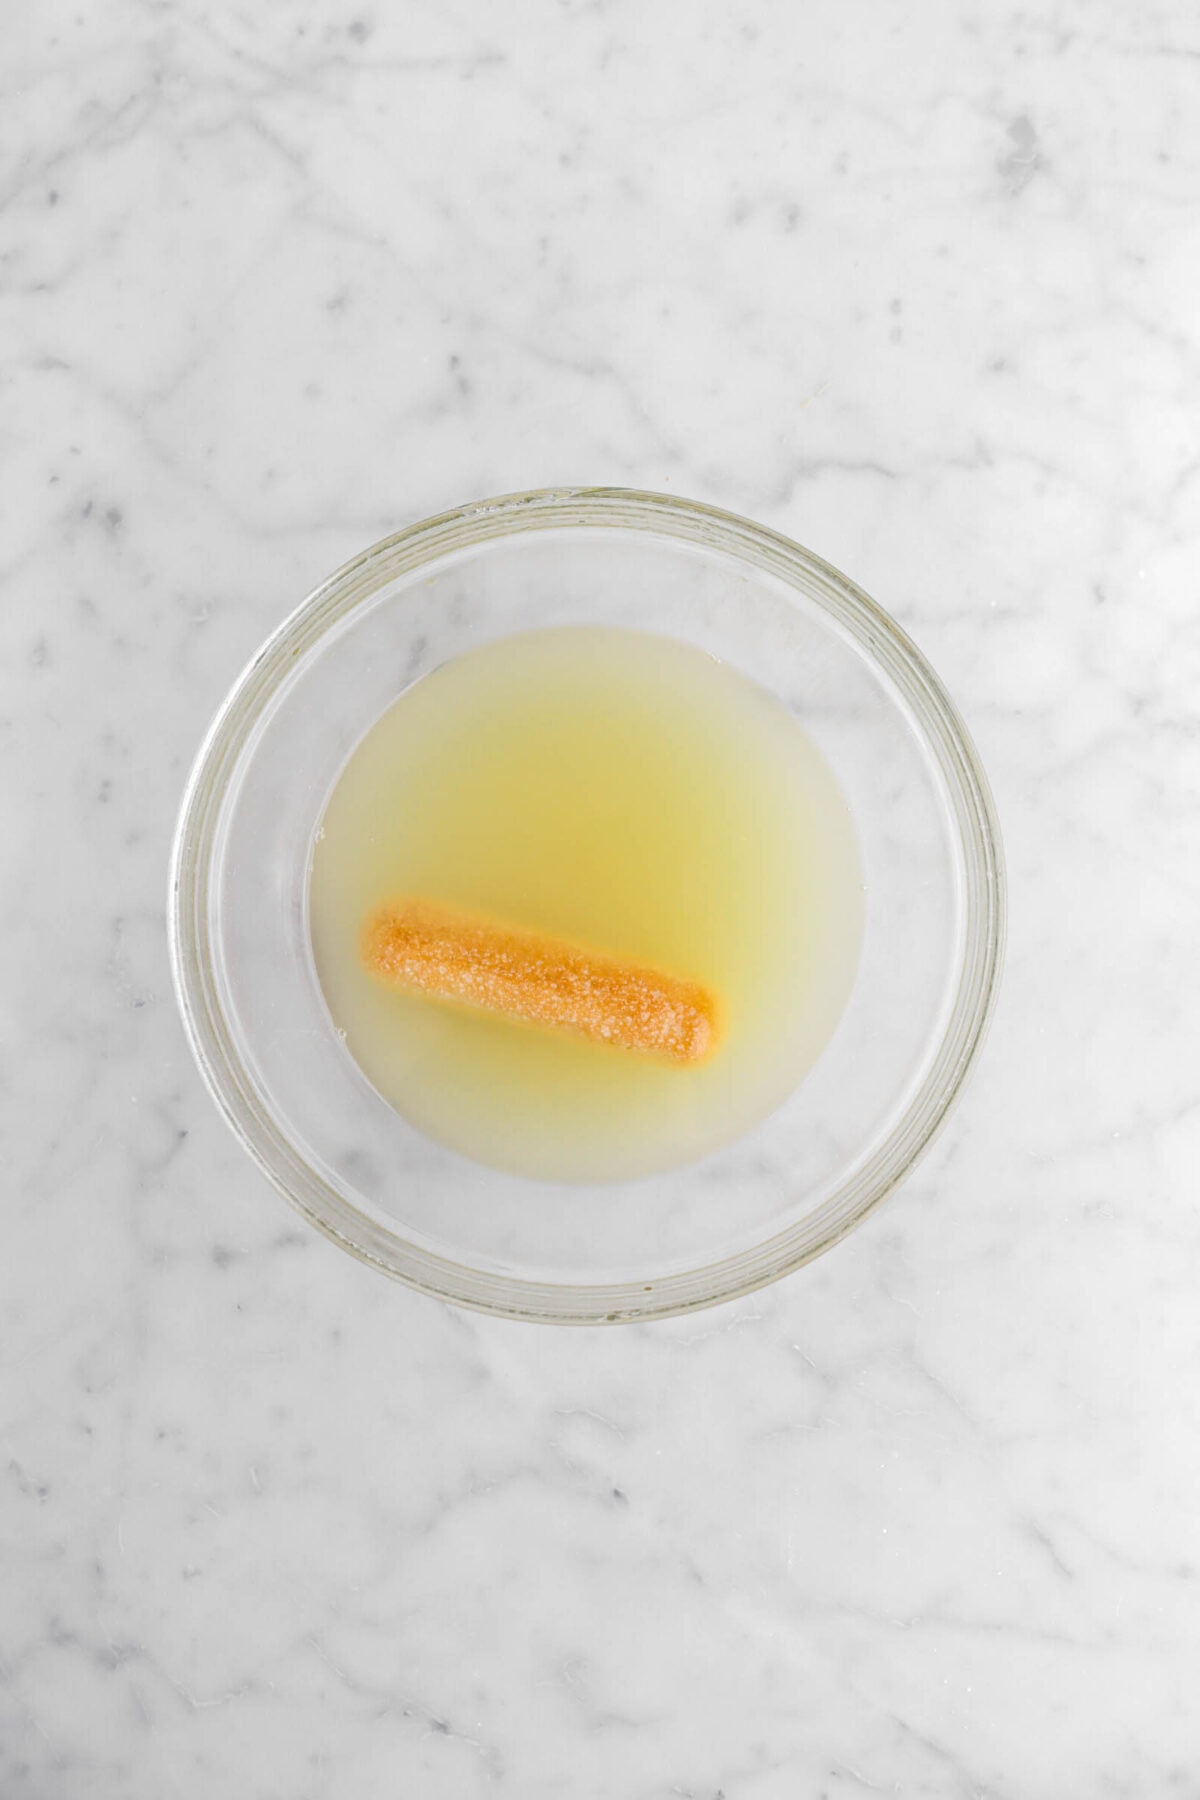 ladyfinger cookie soaked in limoncello.